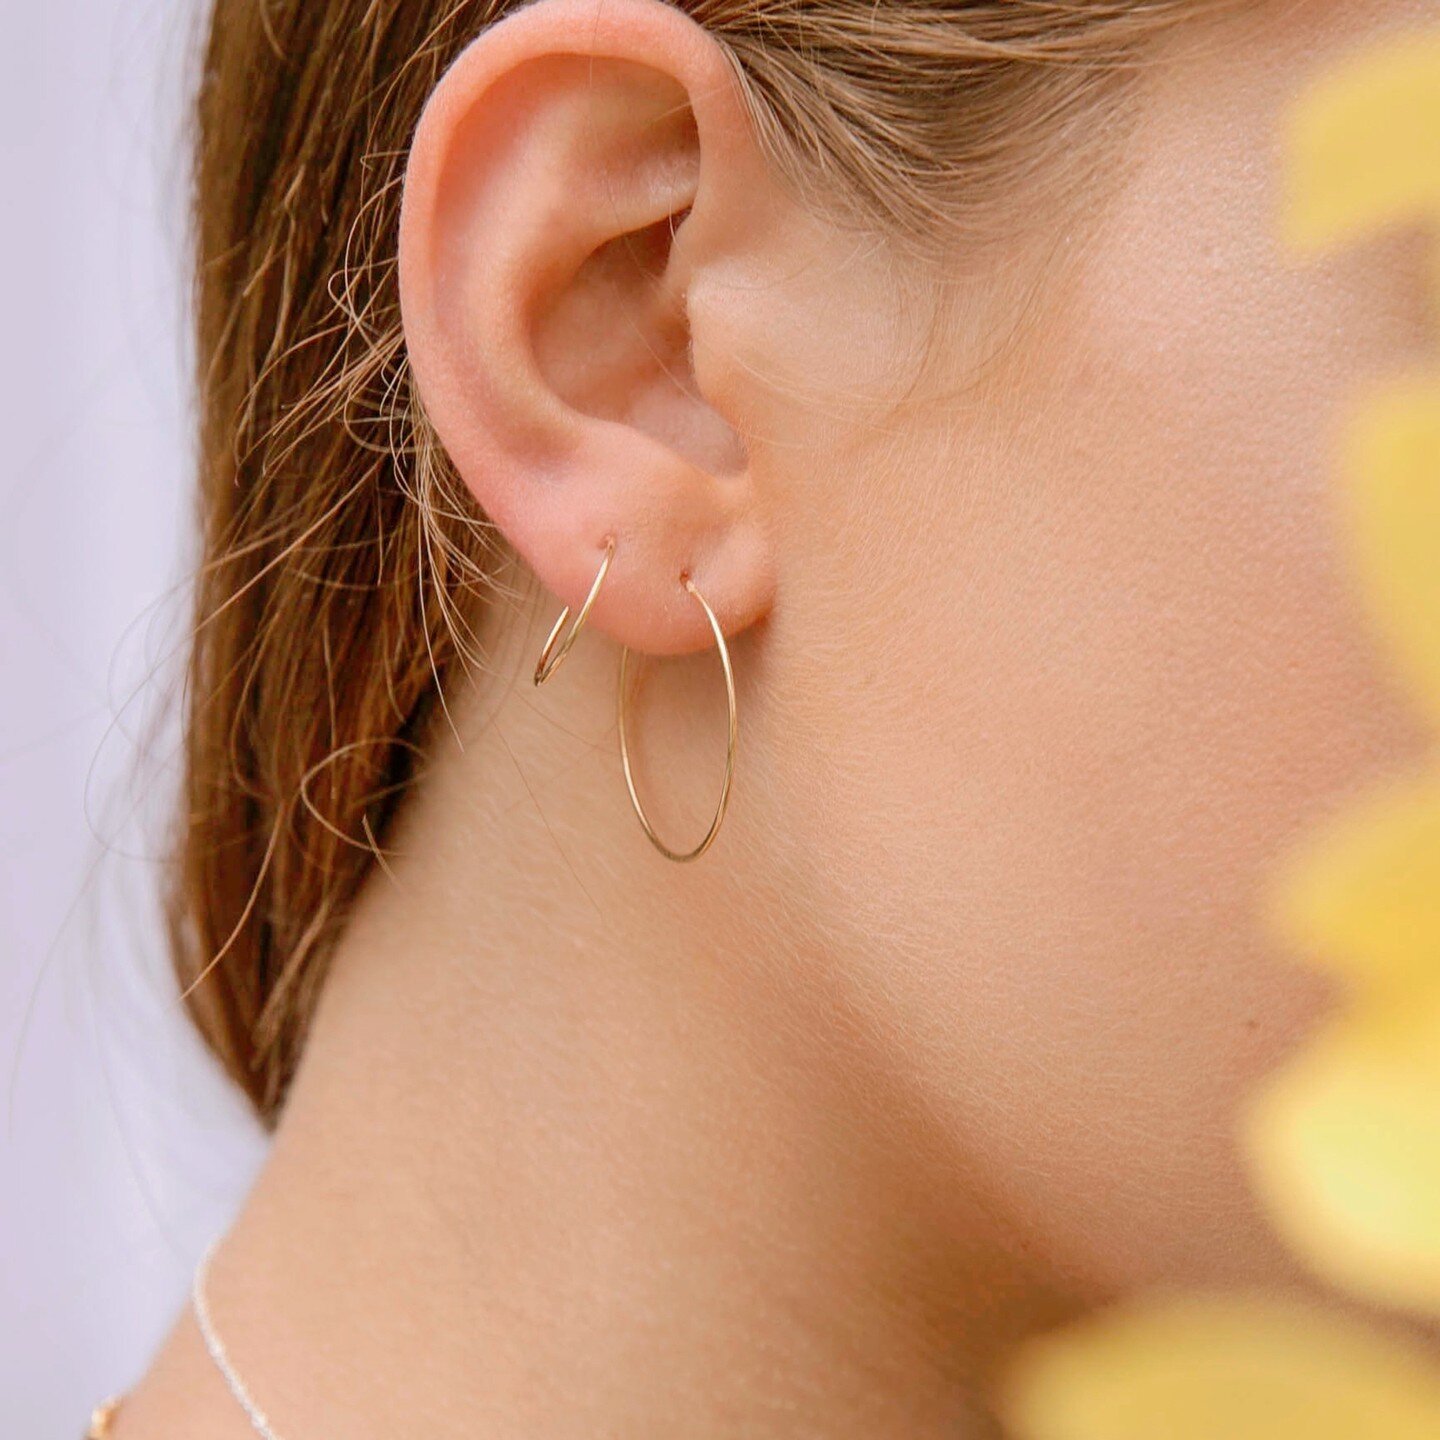 Two minimalistic hoops, one eye-catching look. 🤩⁠
⁠
Jewelry doesn't have to be big and heavy to garner attention. ⁠
⁠
Stop by the studio today or visit our online store to see all the sweet looks available.